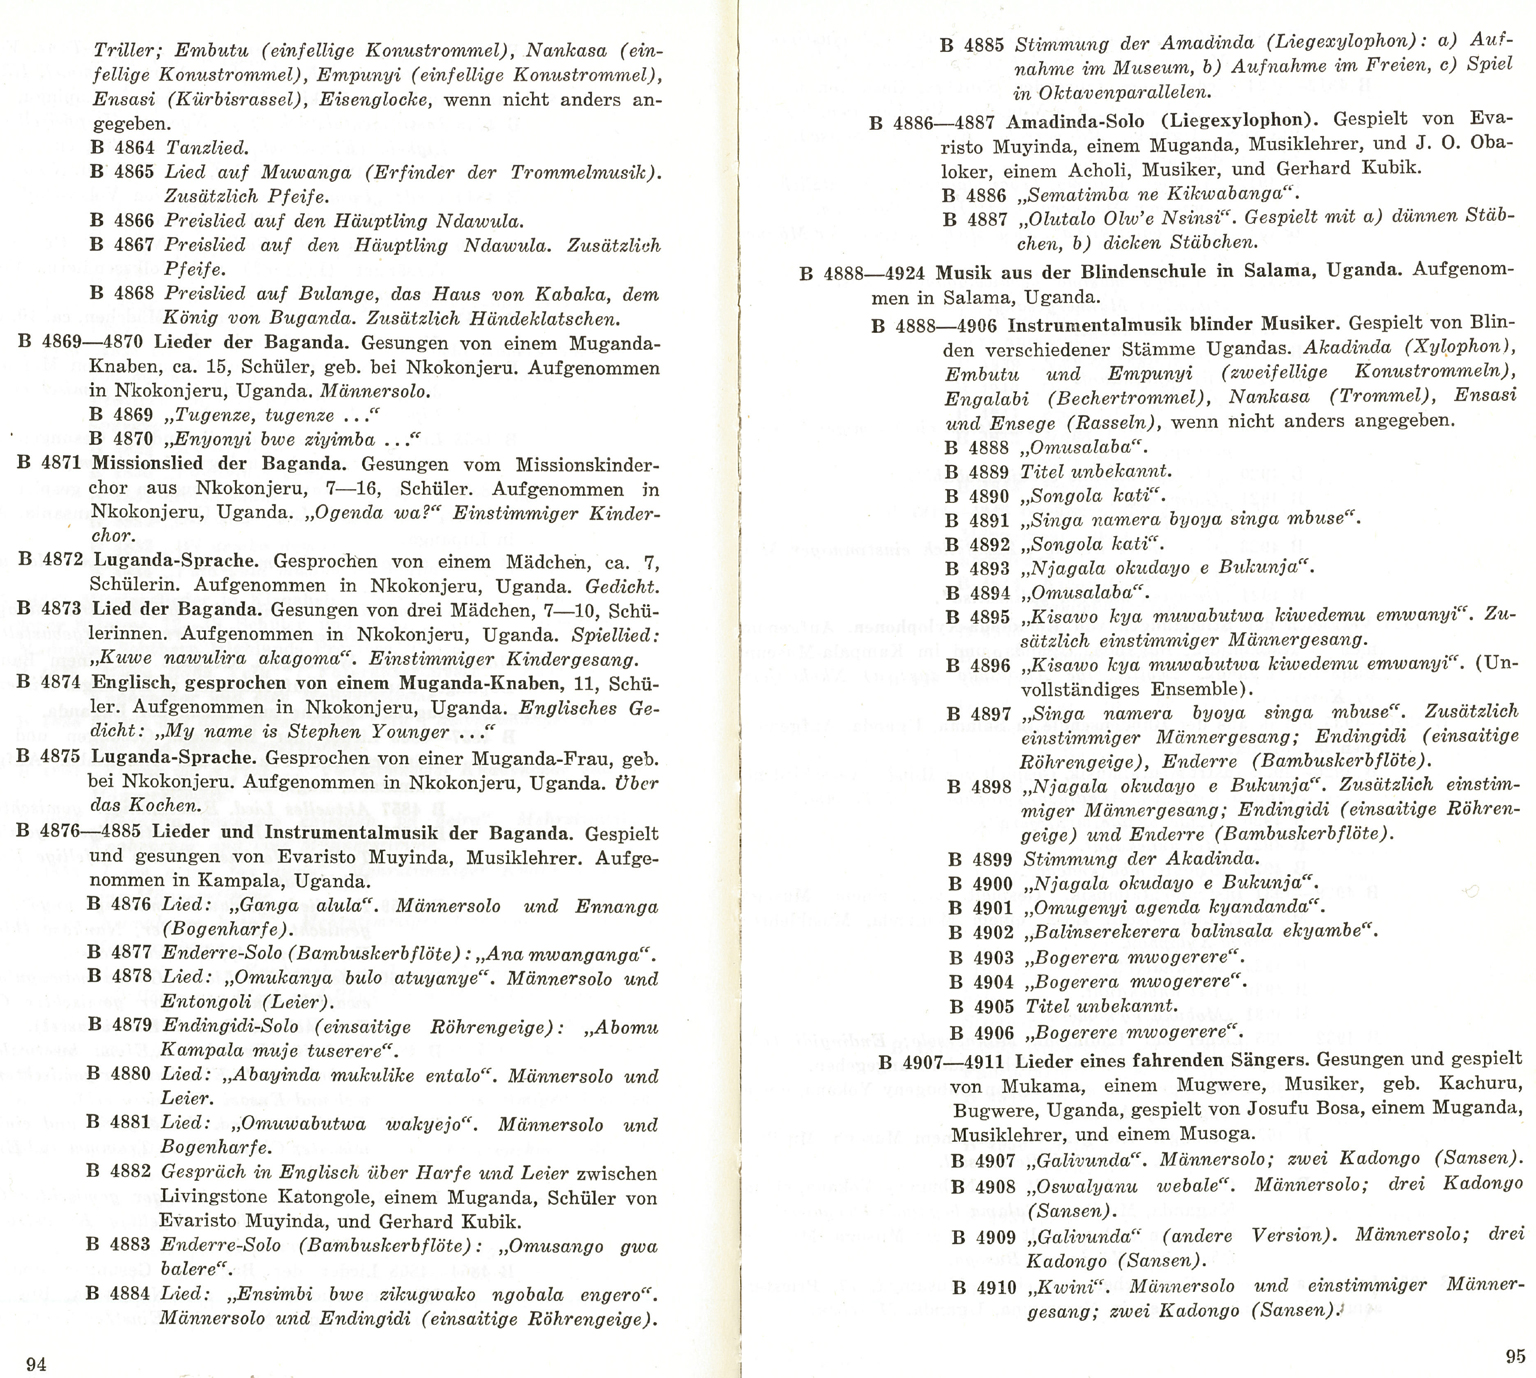 Photo Of The 1966 Catalogue Of The Recording (hermann, Schendl And Schüller 1966)